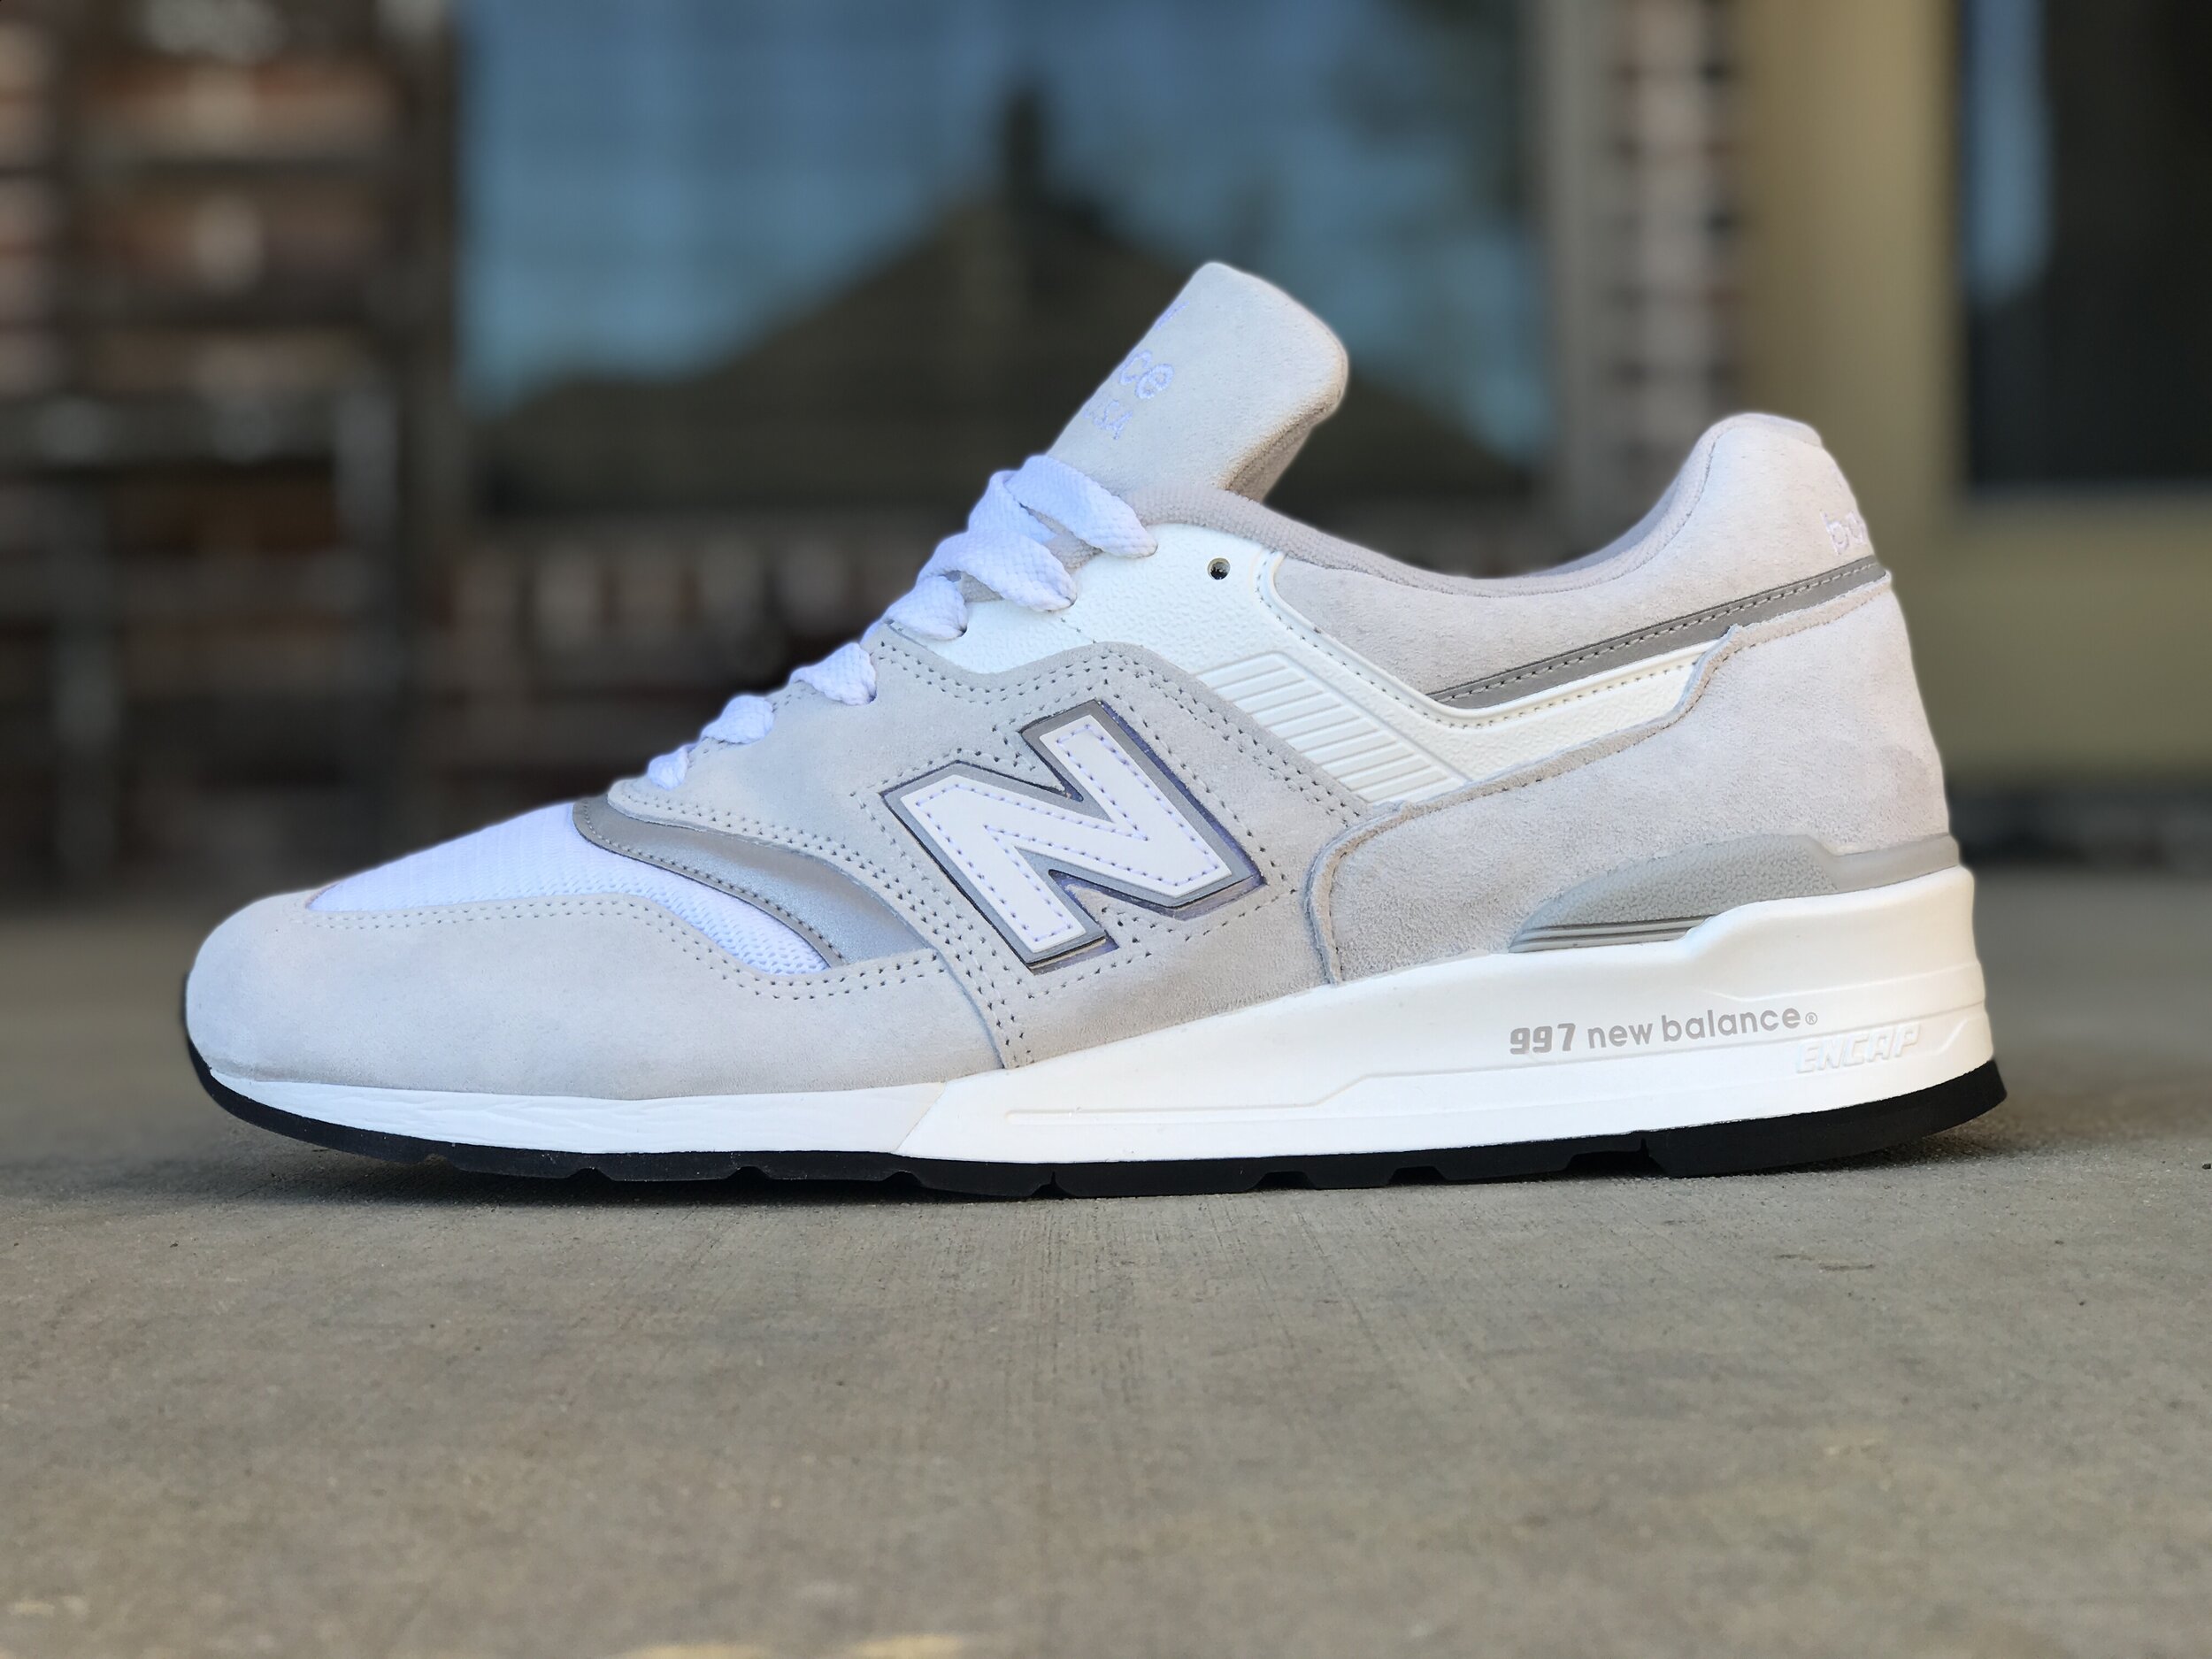 Unboxing The Made in the USA New Balance 997 